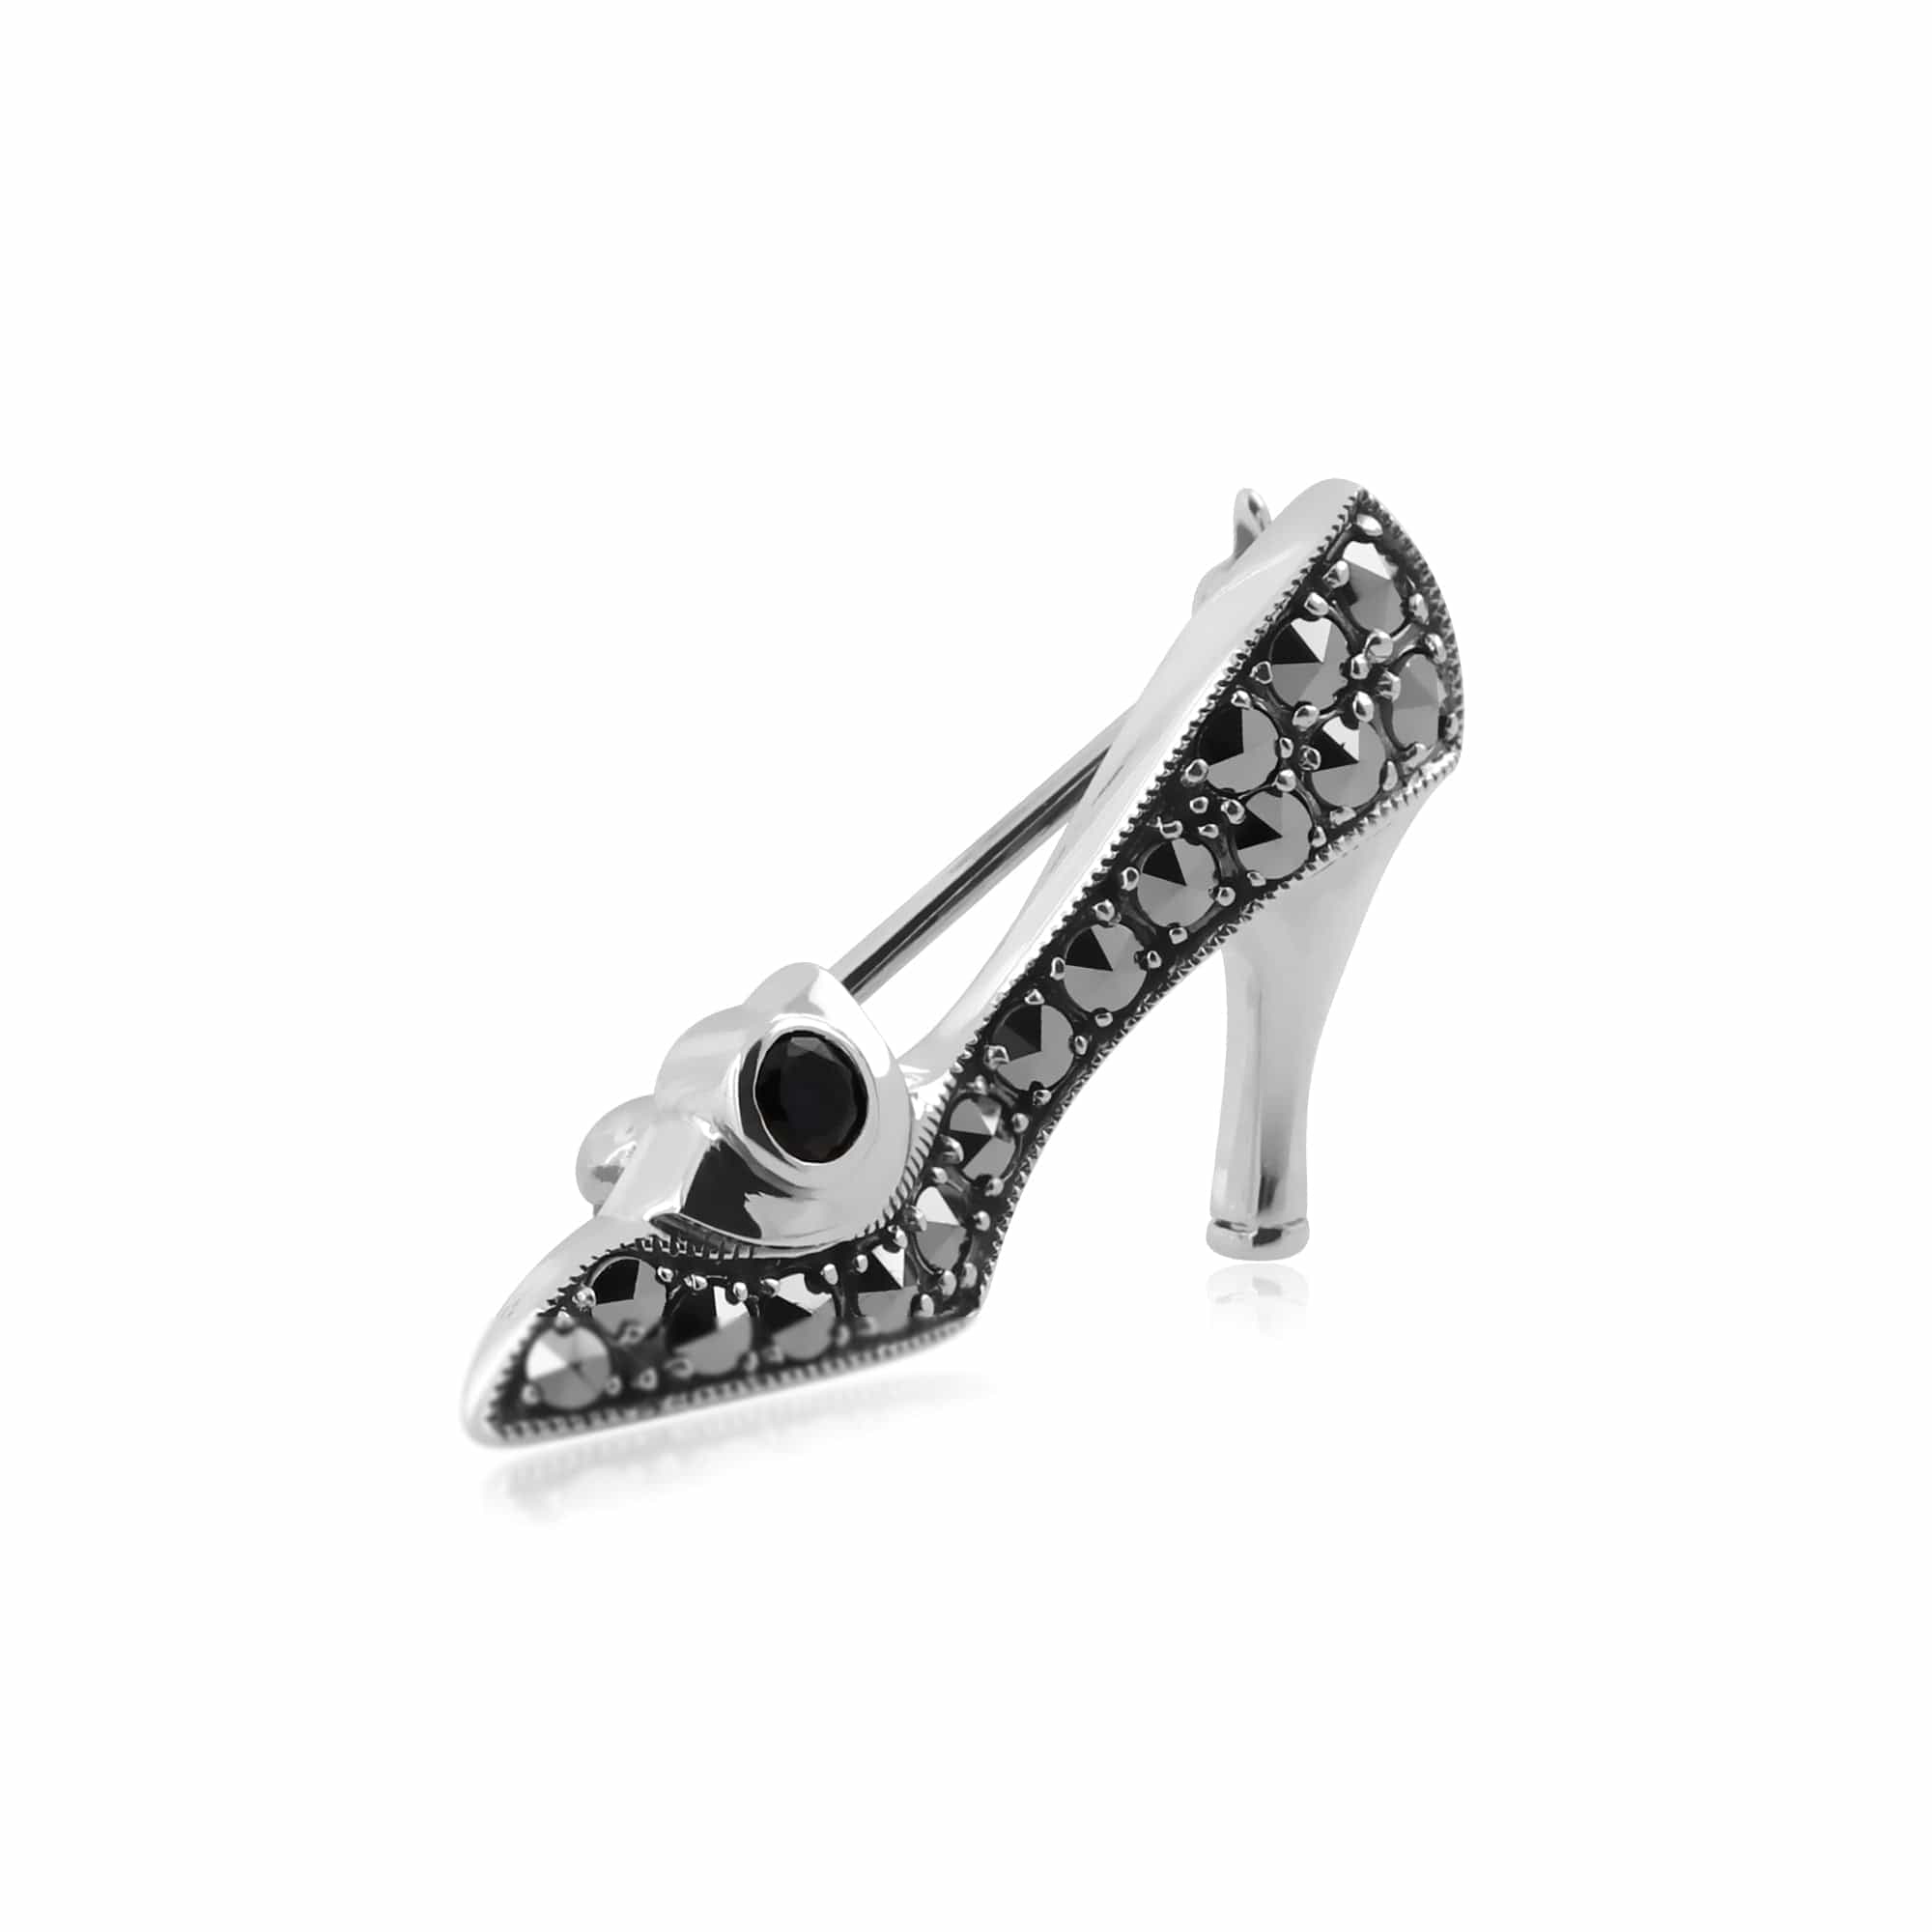 27071 Art Nouveau Style Round Sapphire & Marcasite Shoe Brooch in 925 Sterling Silver 2